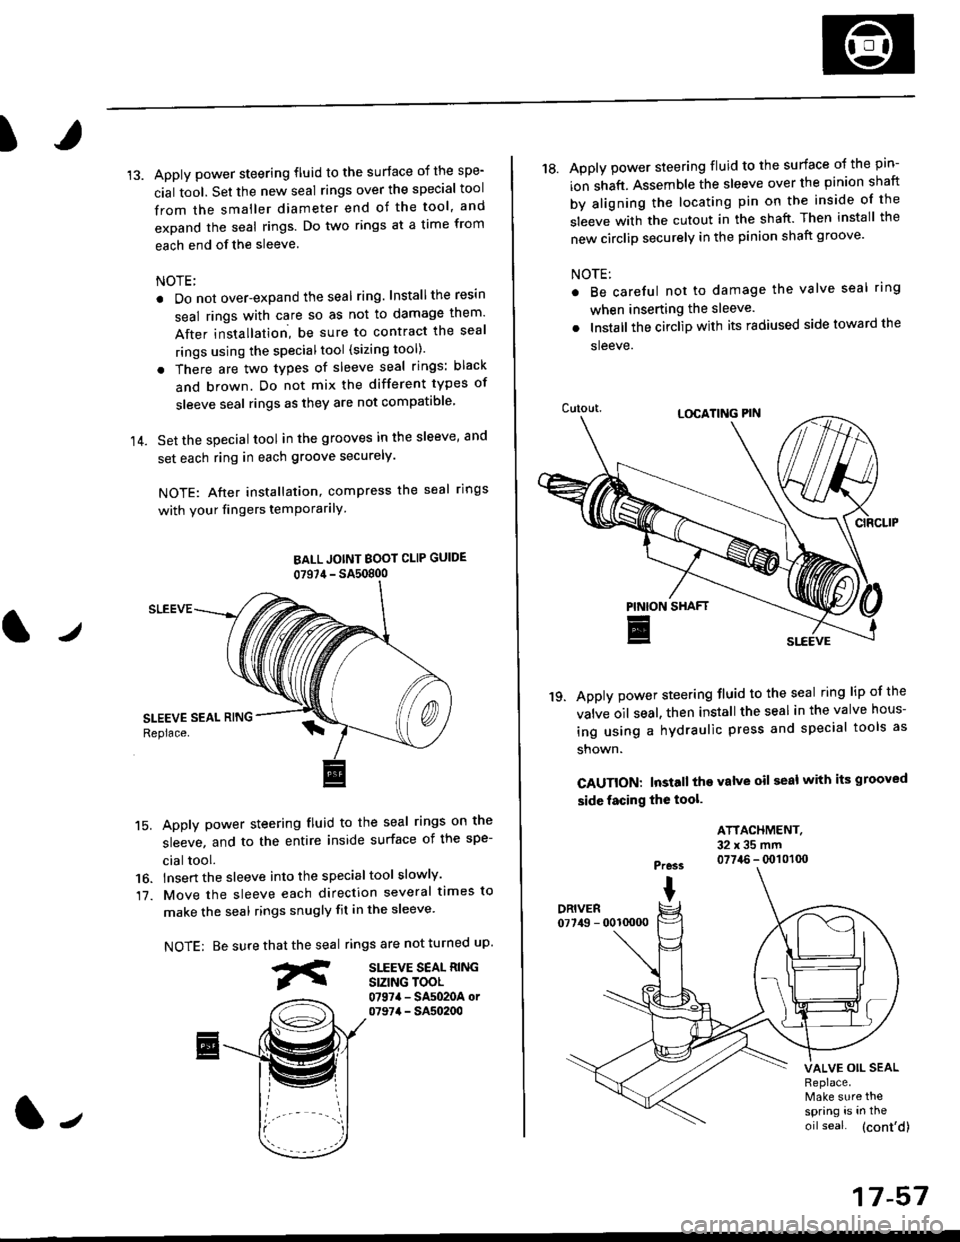 HONDA CIVIC 2000 6.G Workshop Manual I
14.
Apply power steering fluid to the surface of the spe-
cial tool. Set the new seal rings over the special tool
from the smaller diameter end of the tool, and
expand the seal rings. Do two rings a